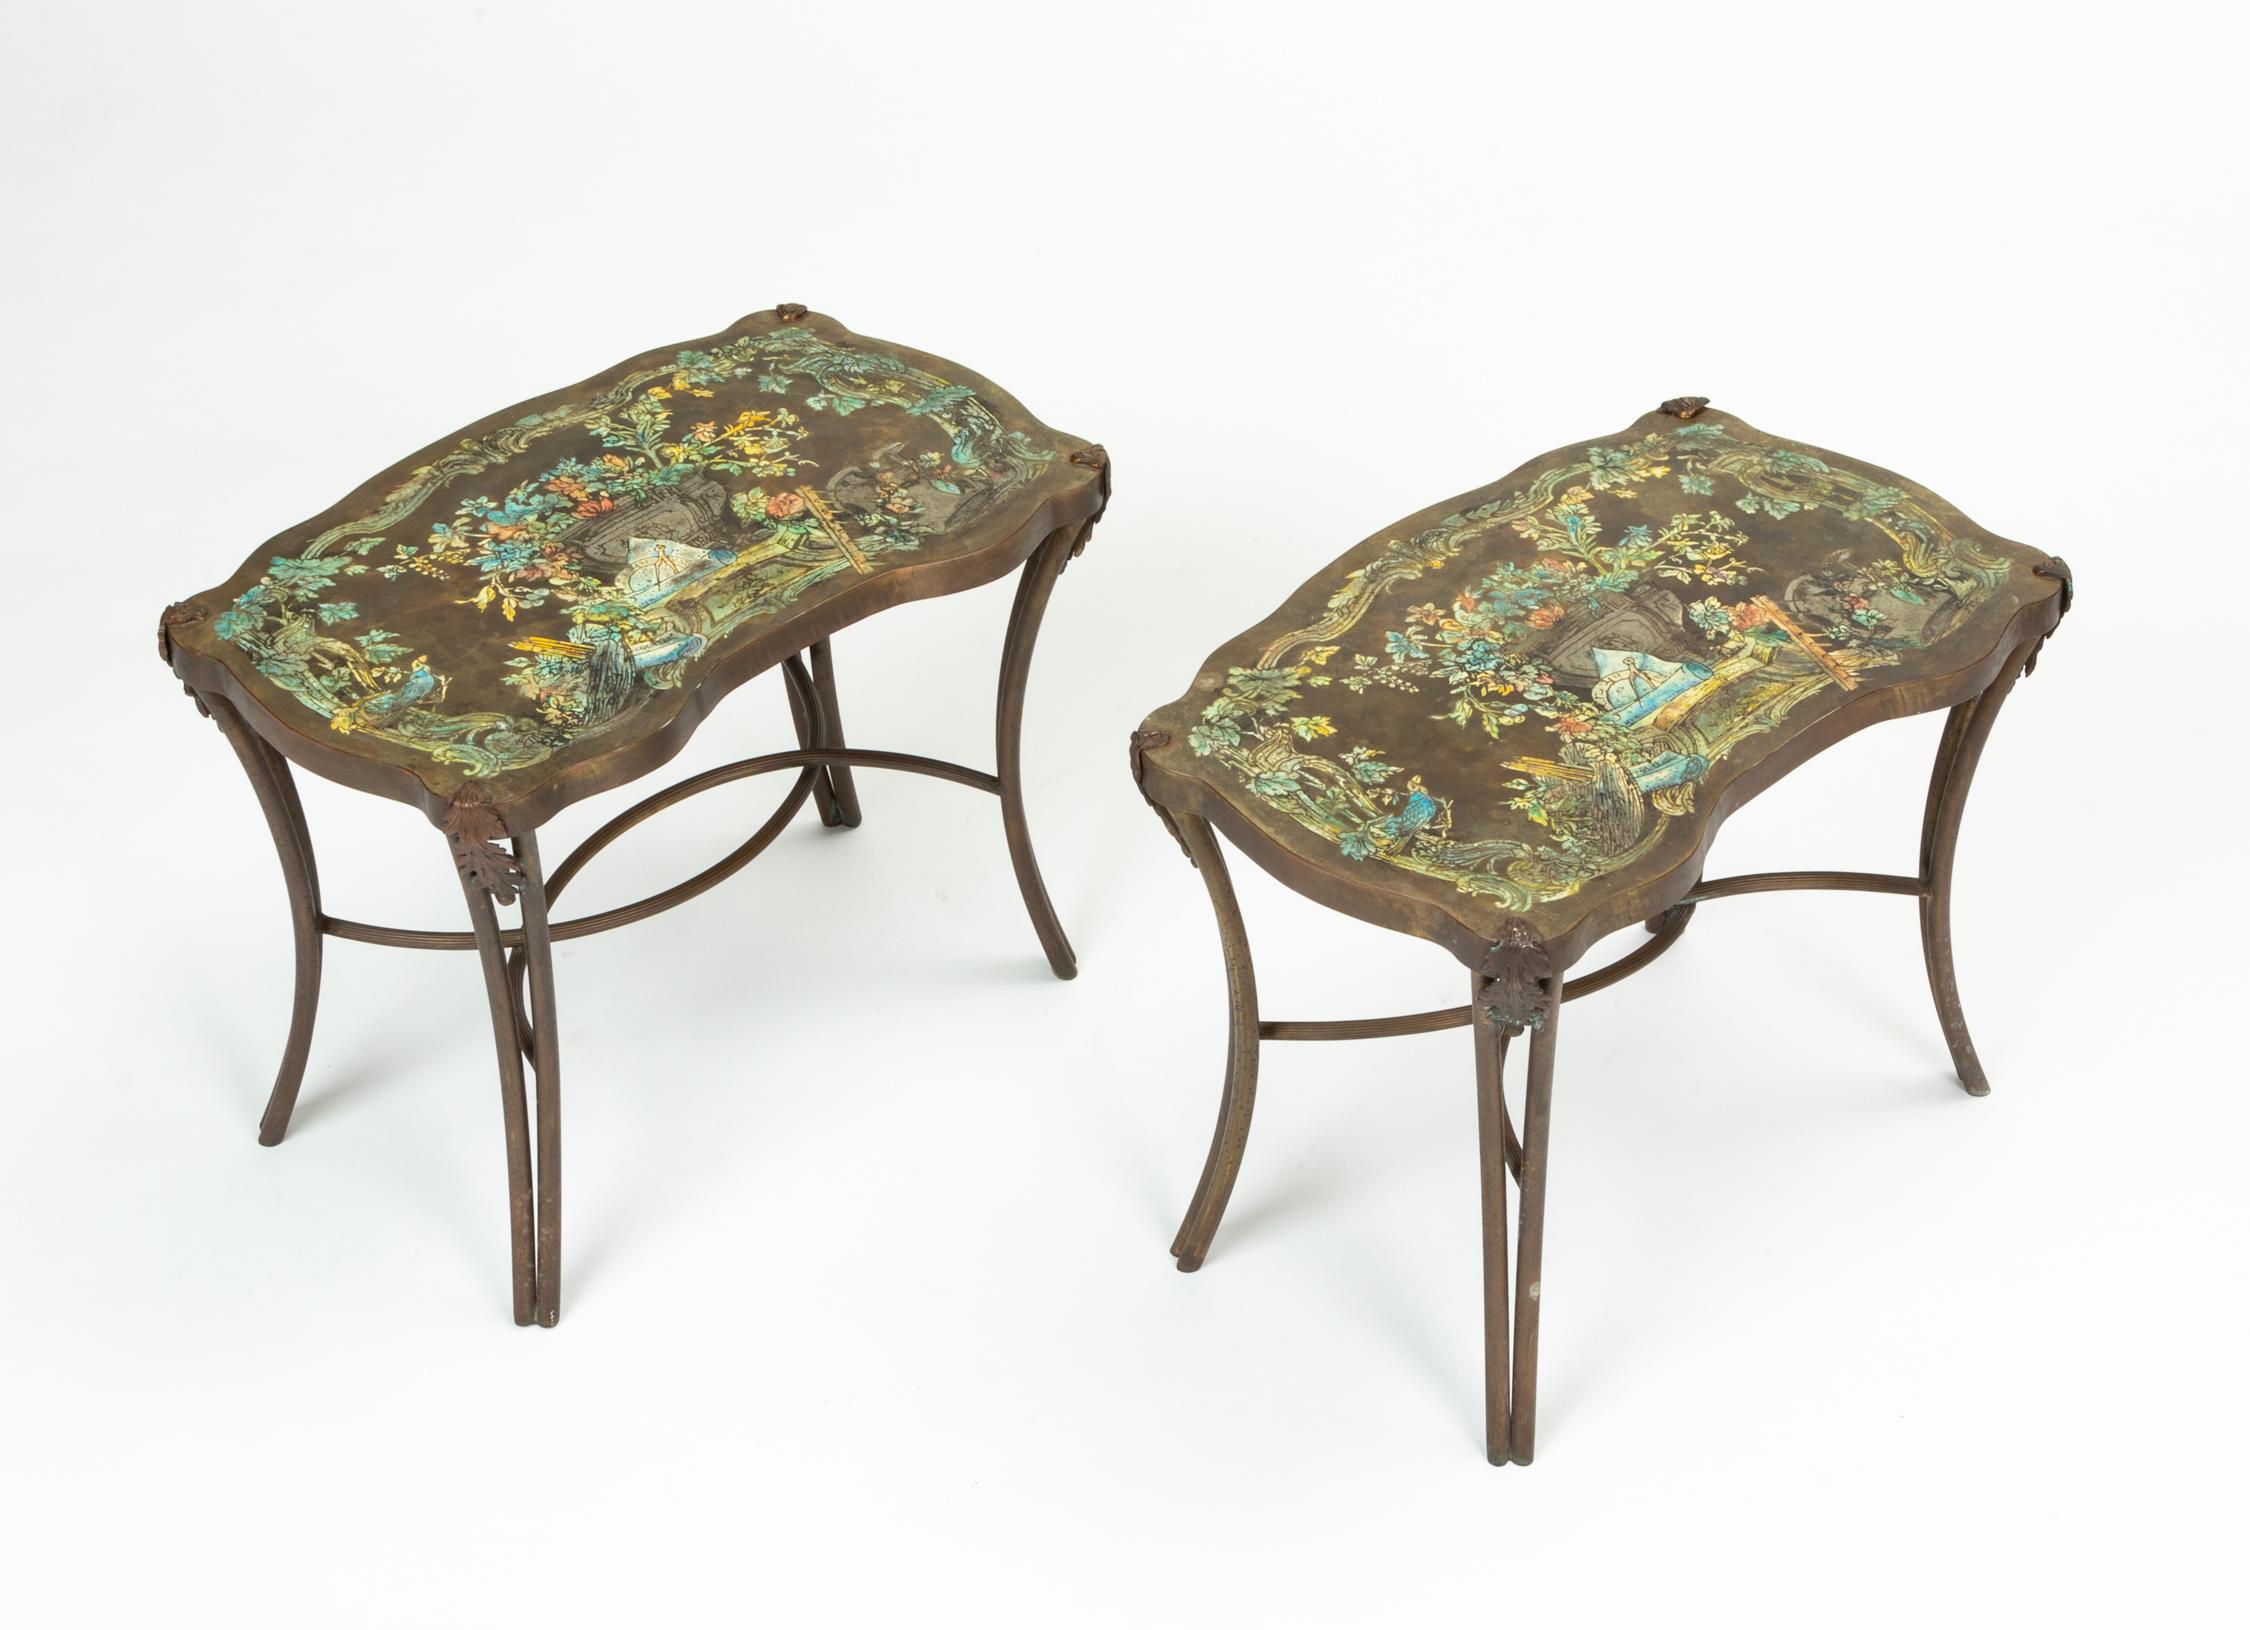 A pair of highly collectible bronze side tables from the “Madame Pompadour” line by Philip and Kelvin LaVerne. Using an involved process perfected through painstaking library research over a six year span, the Kelvins, a father and son duo, began